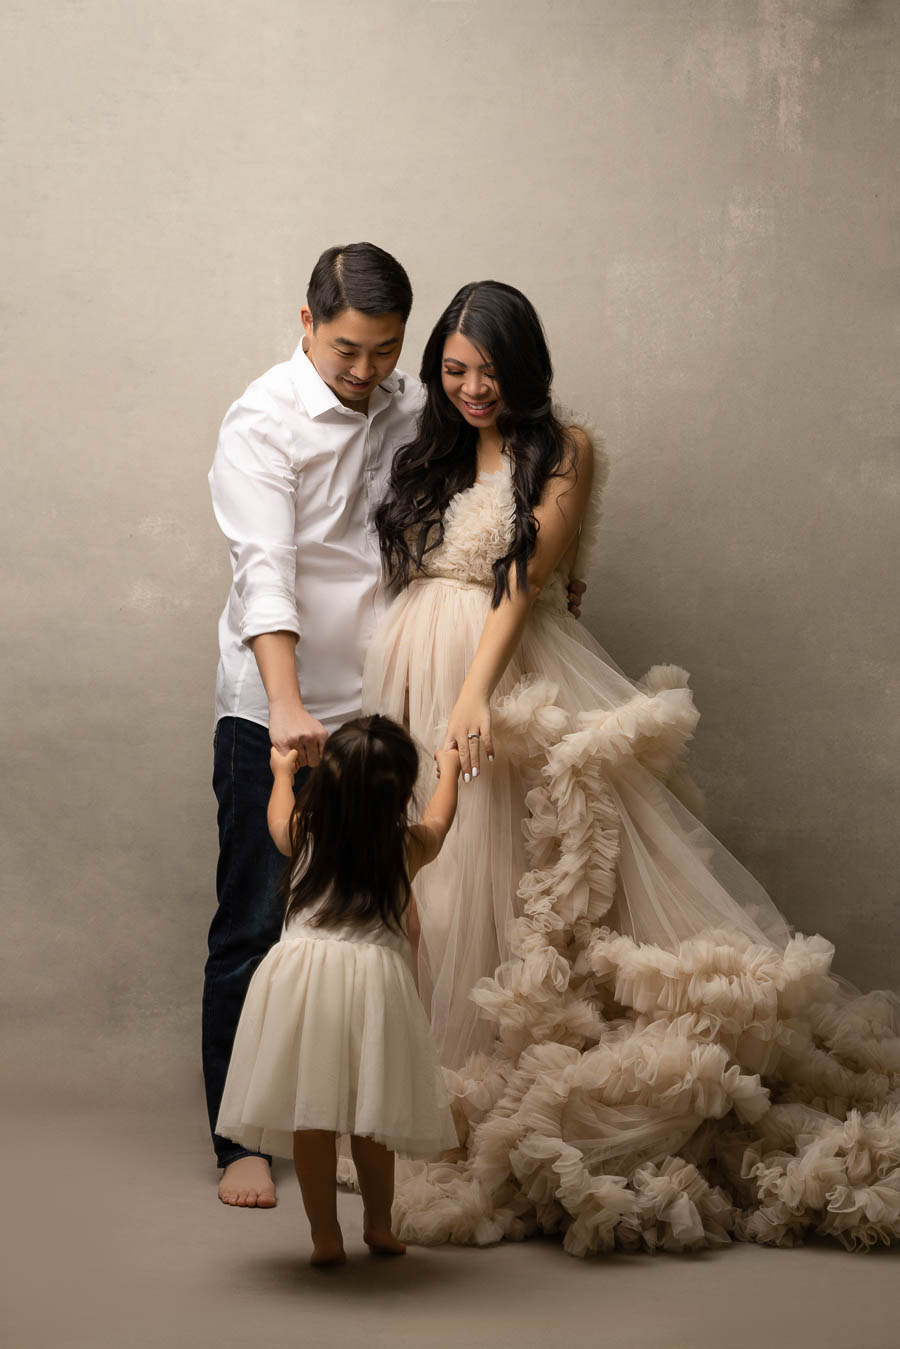 Your Guide to Combining a Maternity and Family Photoshoot